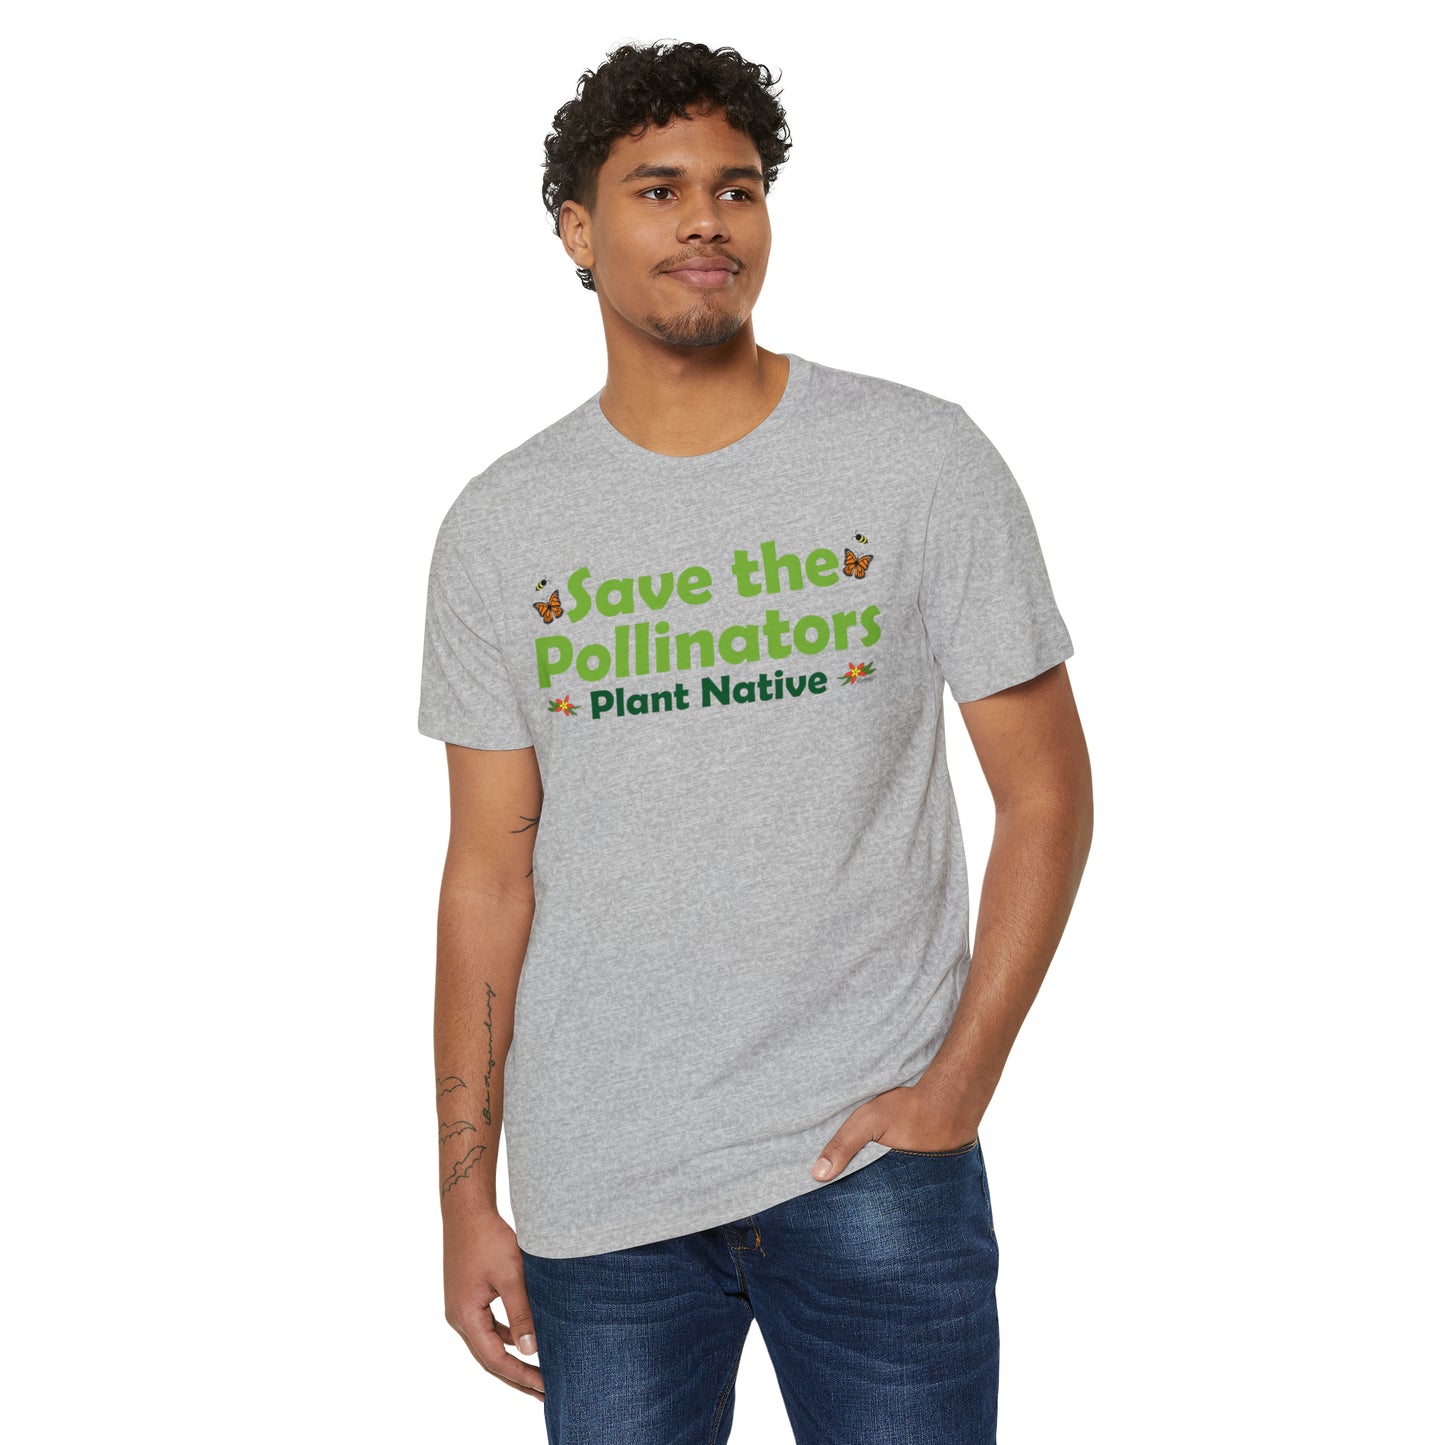 Save the Pollinators, Plant Native: The Perfect Recycled Poly Blend Unisex T-Shirt for Nature Lovers